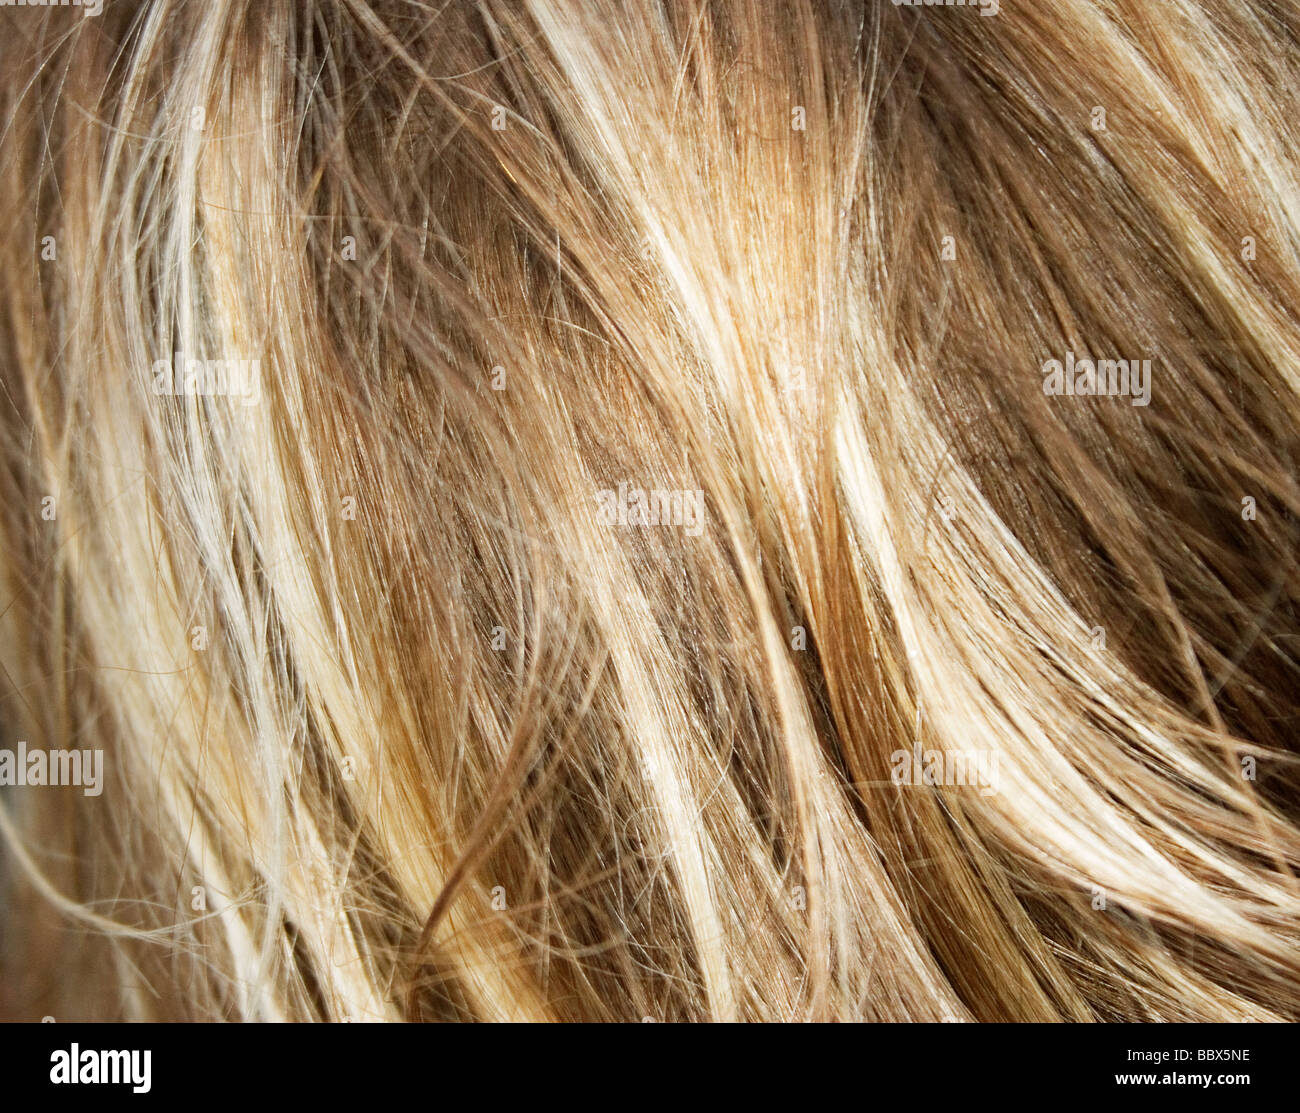 Blond hair close-up Sweden. Stock Photo